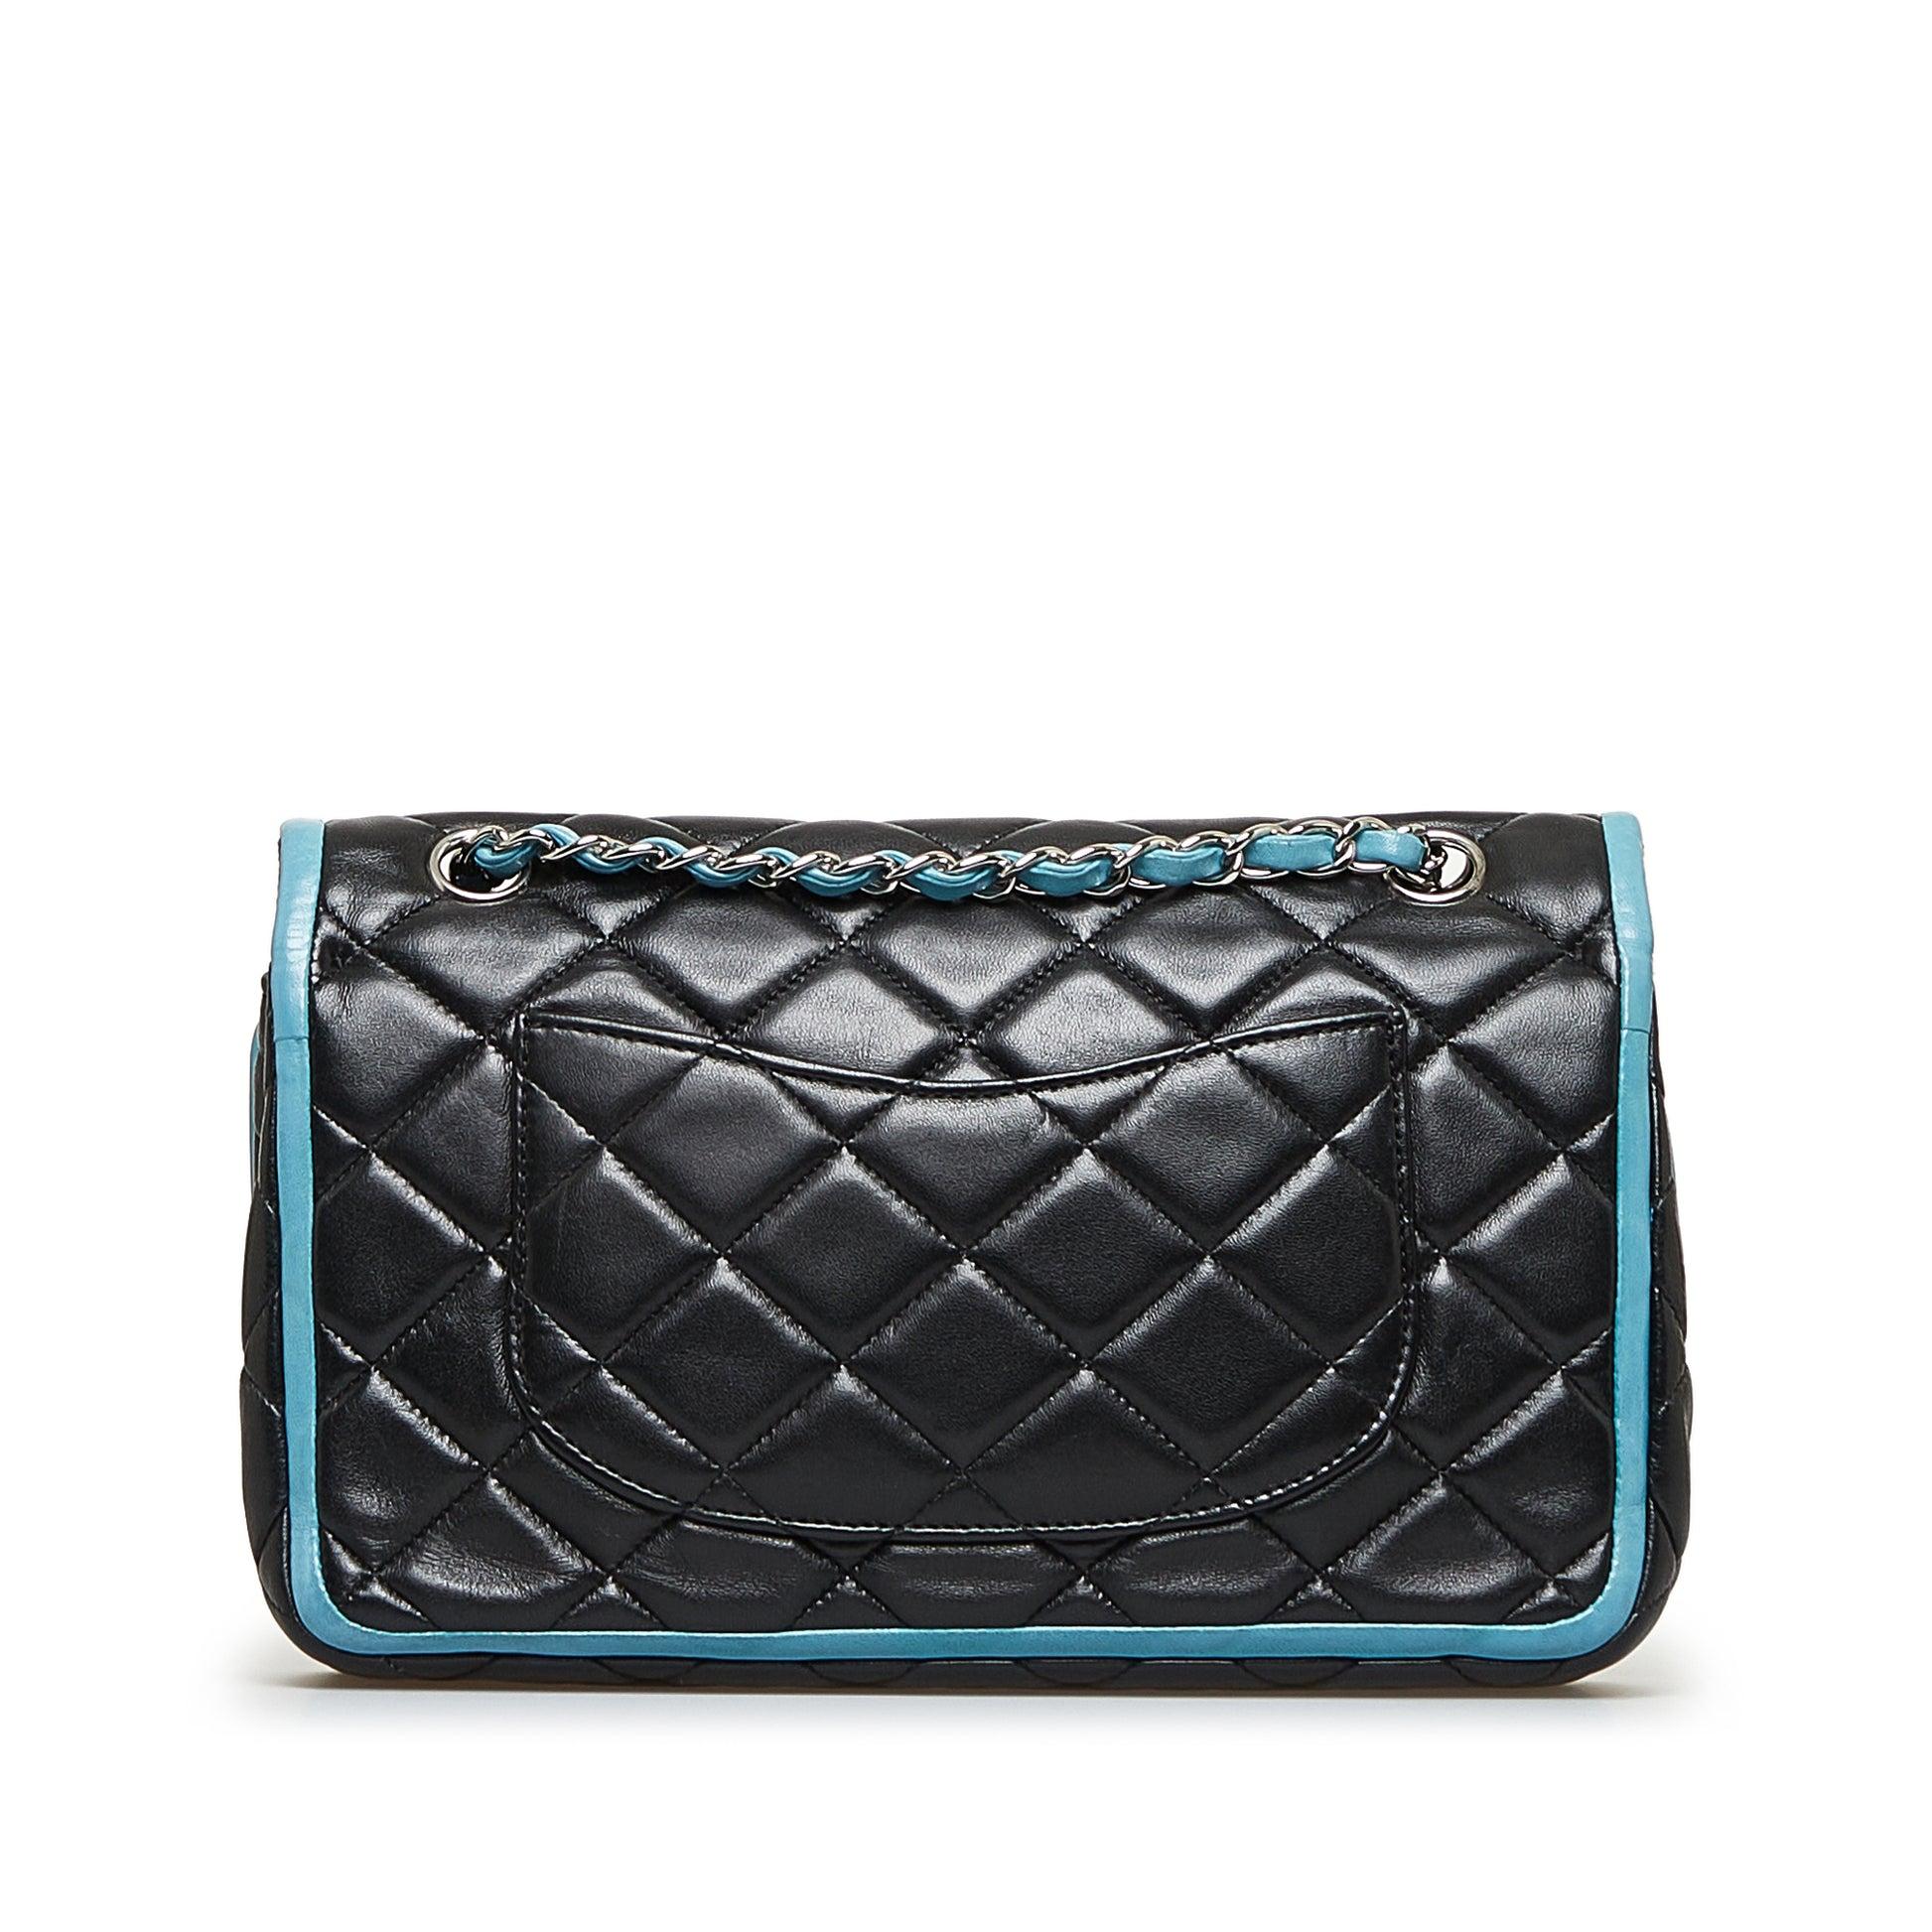 Chanel 2006 Medium Double Classic Flap in Black Lambskin Turquoise Piping Bag 6